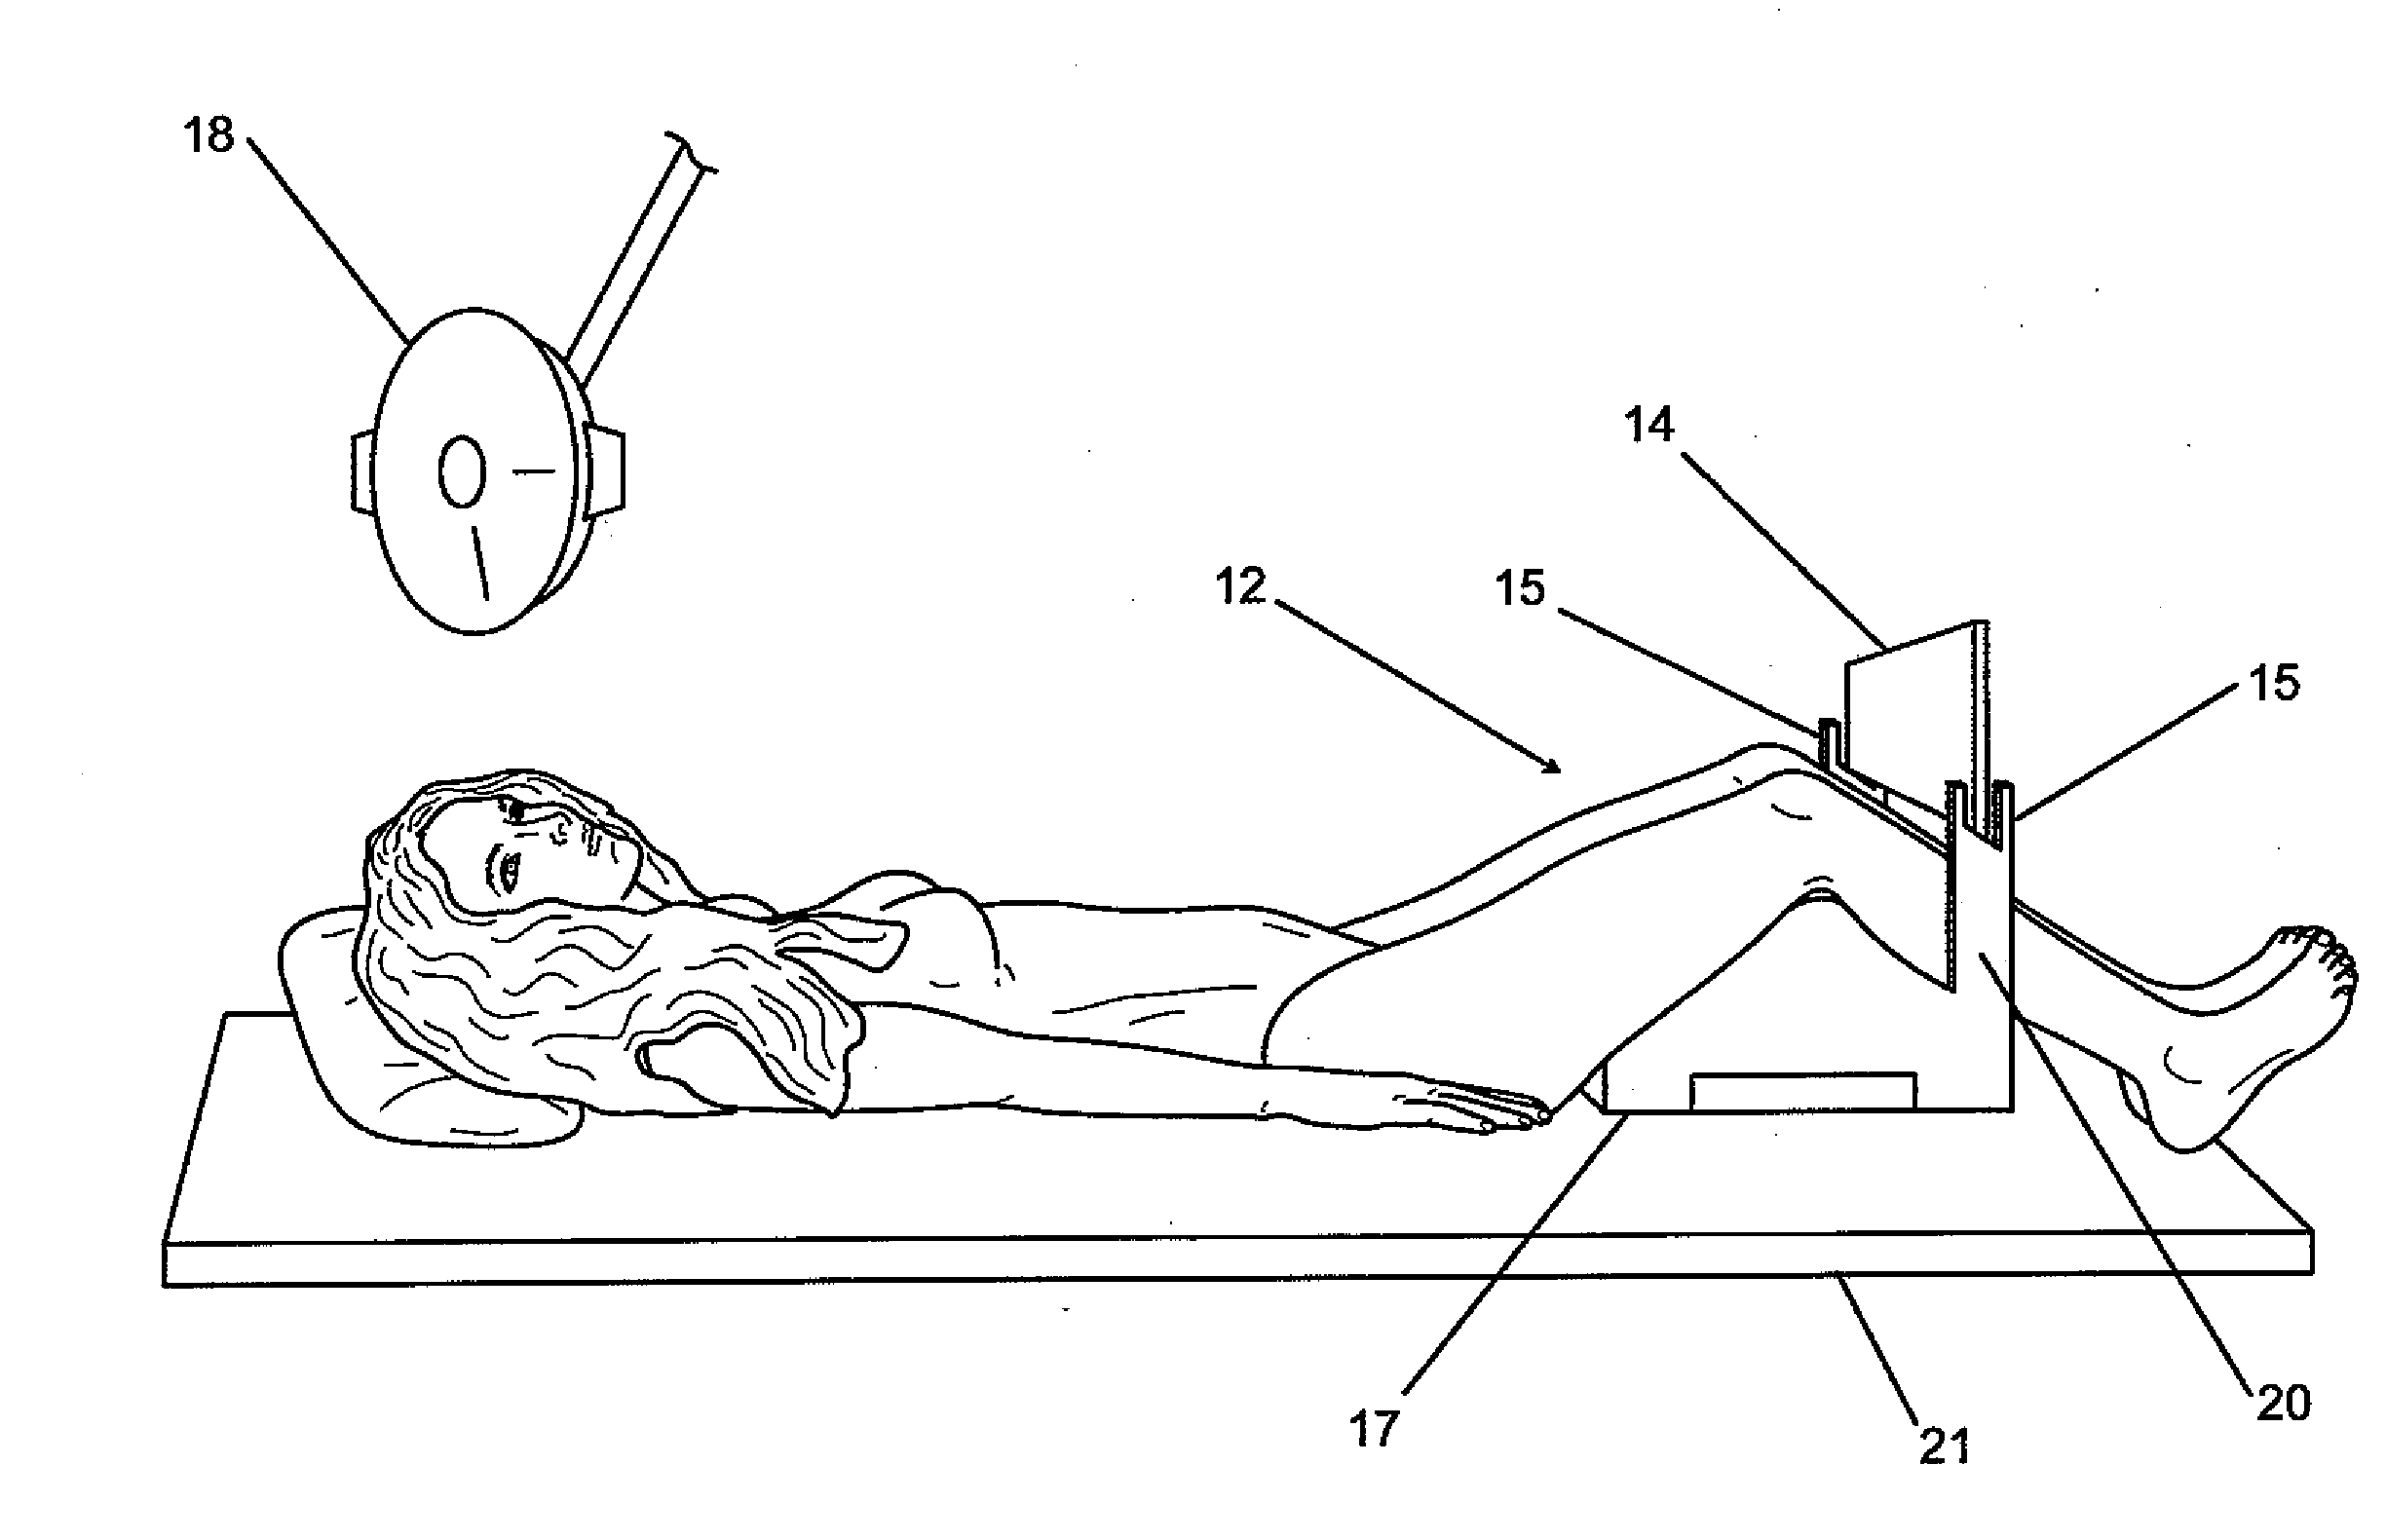 Patient positioning device and method for obtaining bent knee x-ray views